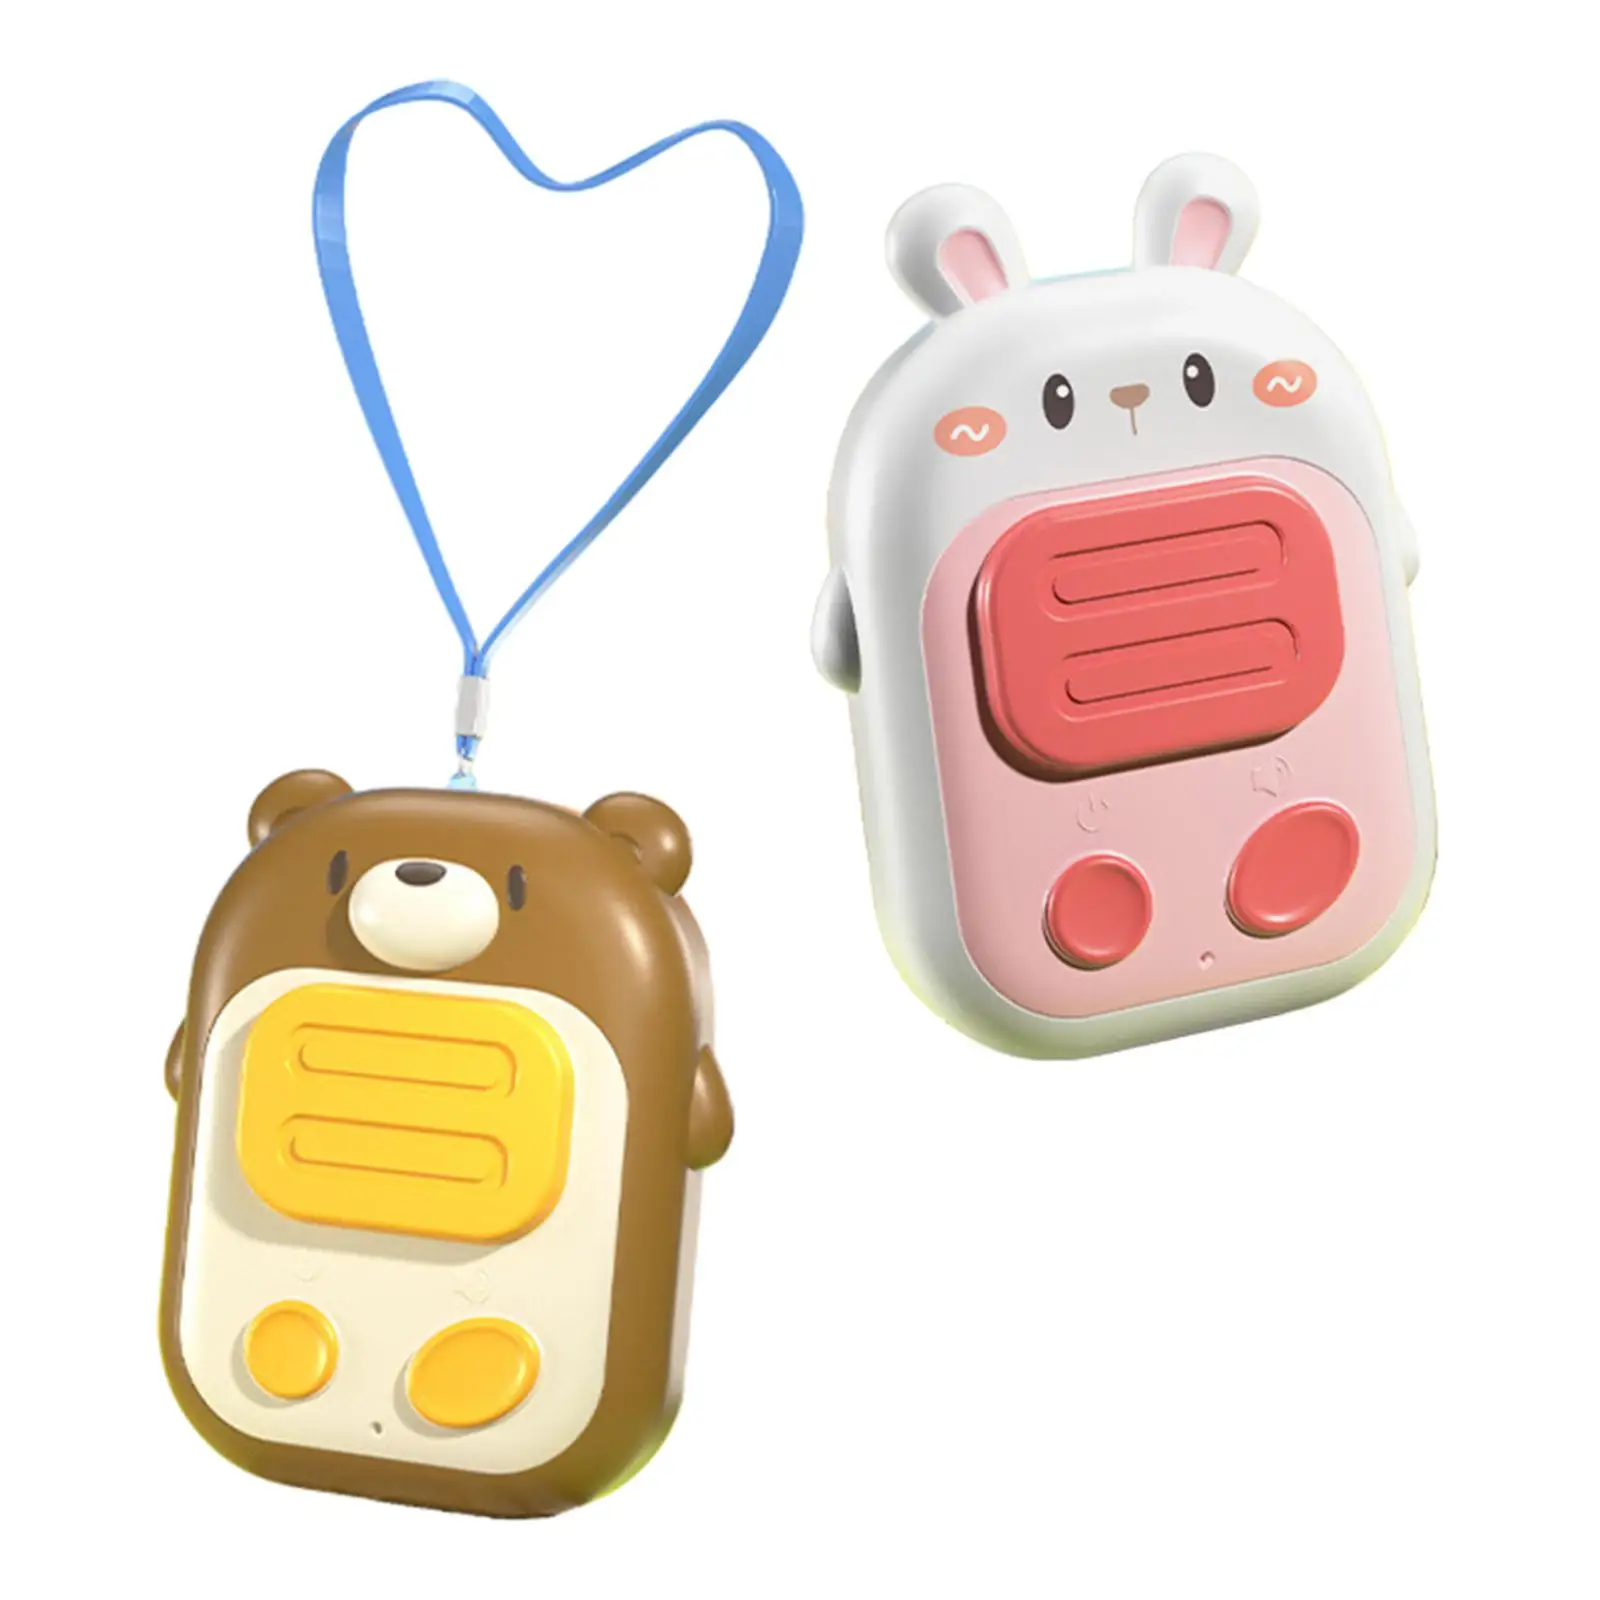 2 Pieces Kids Walkie Talkies Lightweight Portable 500M Long Distance Kids Toys for Travel Camping Hiking 3 Years Old Toddlers